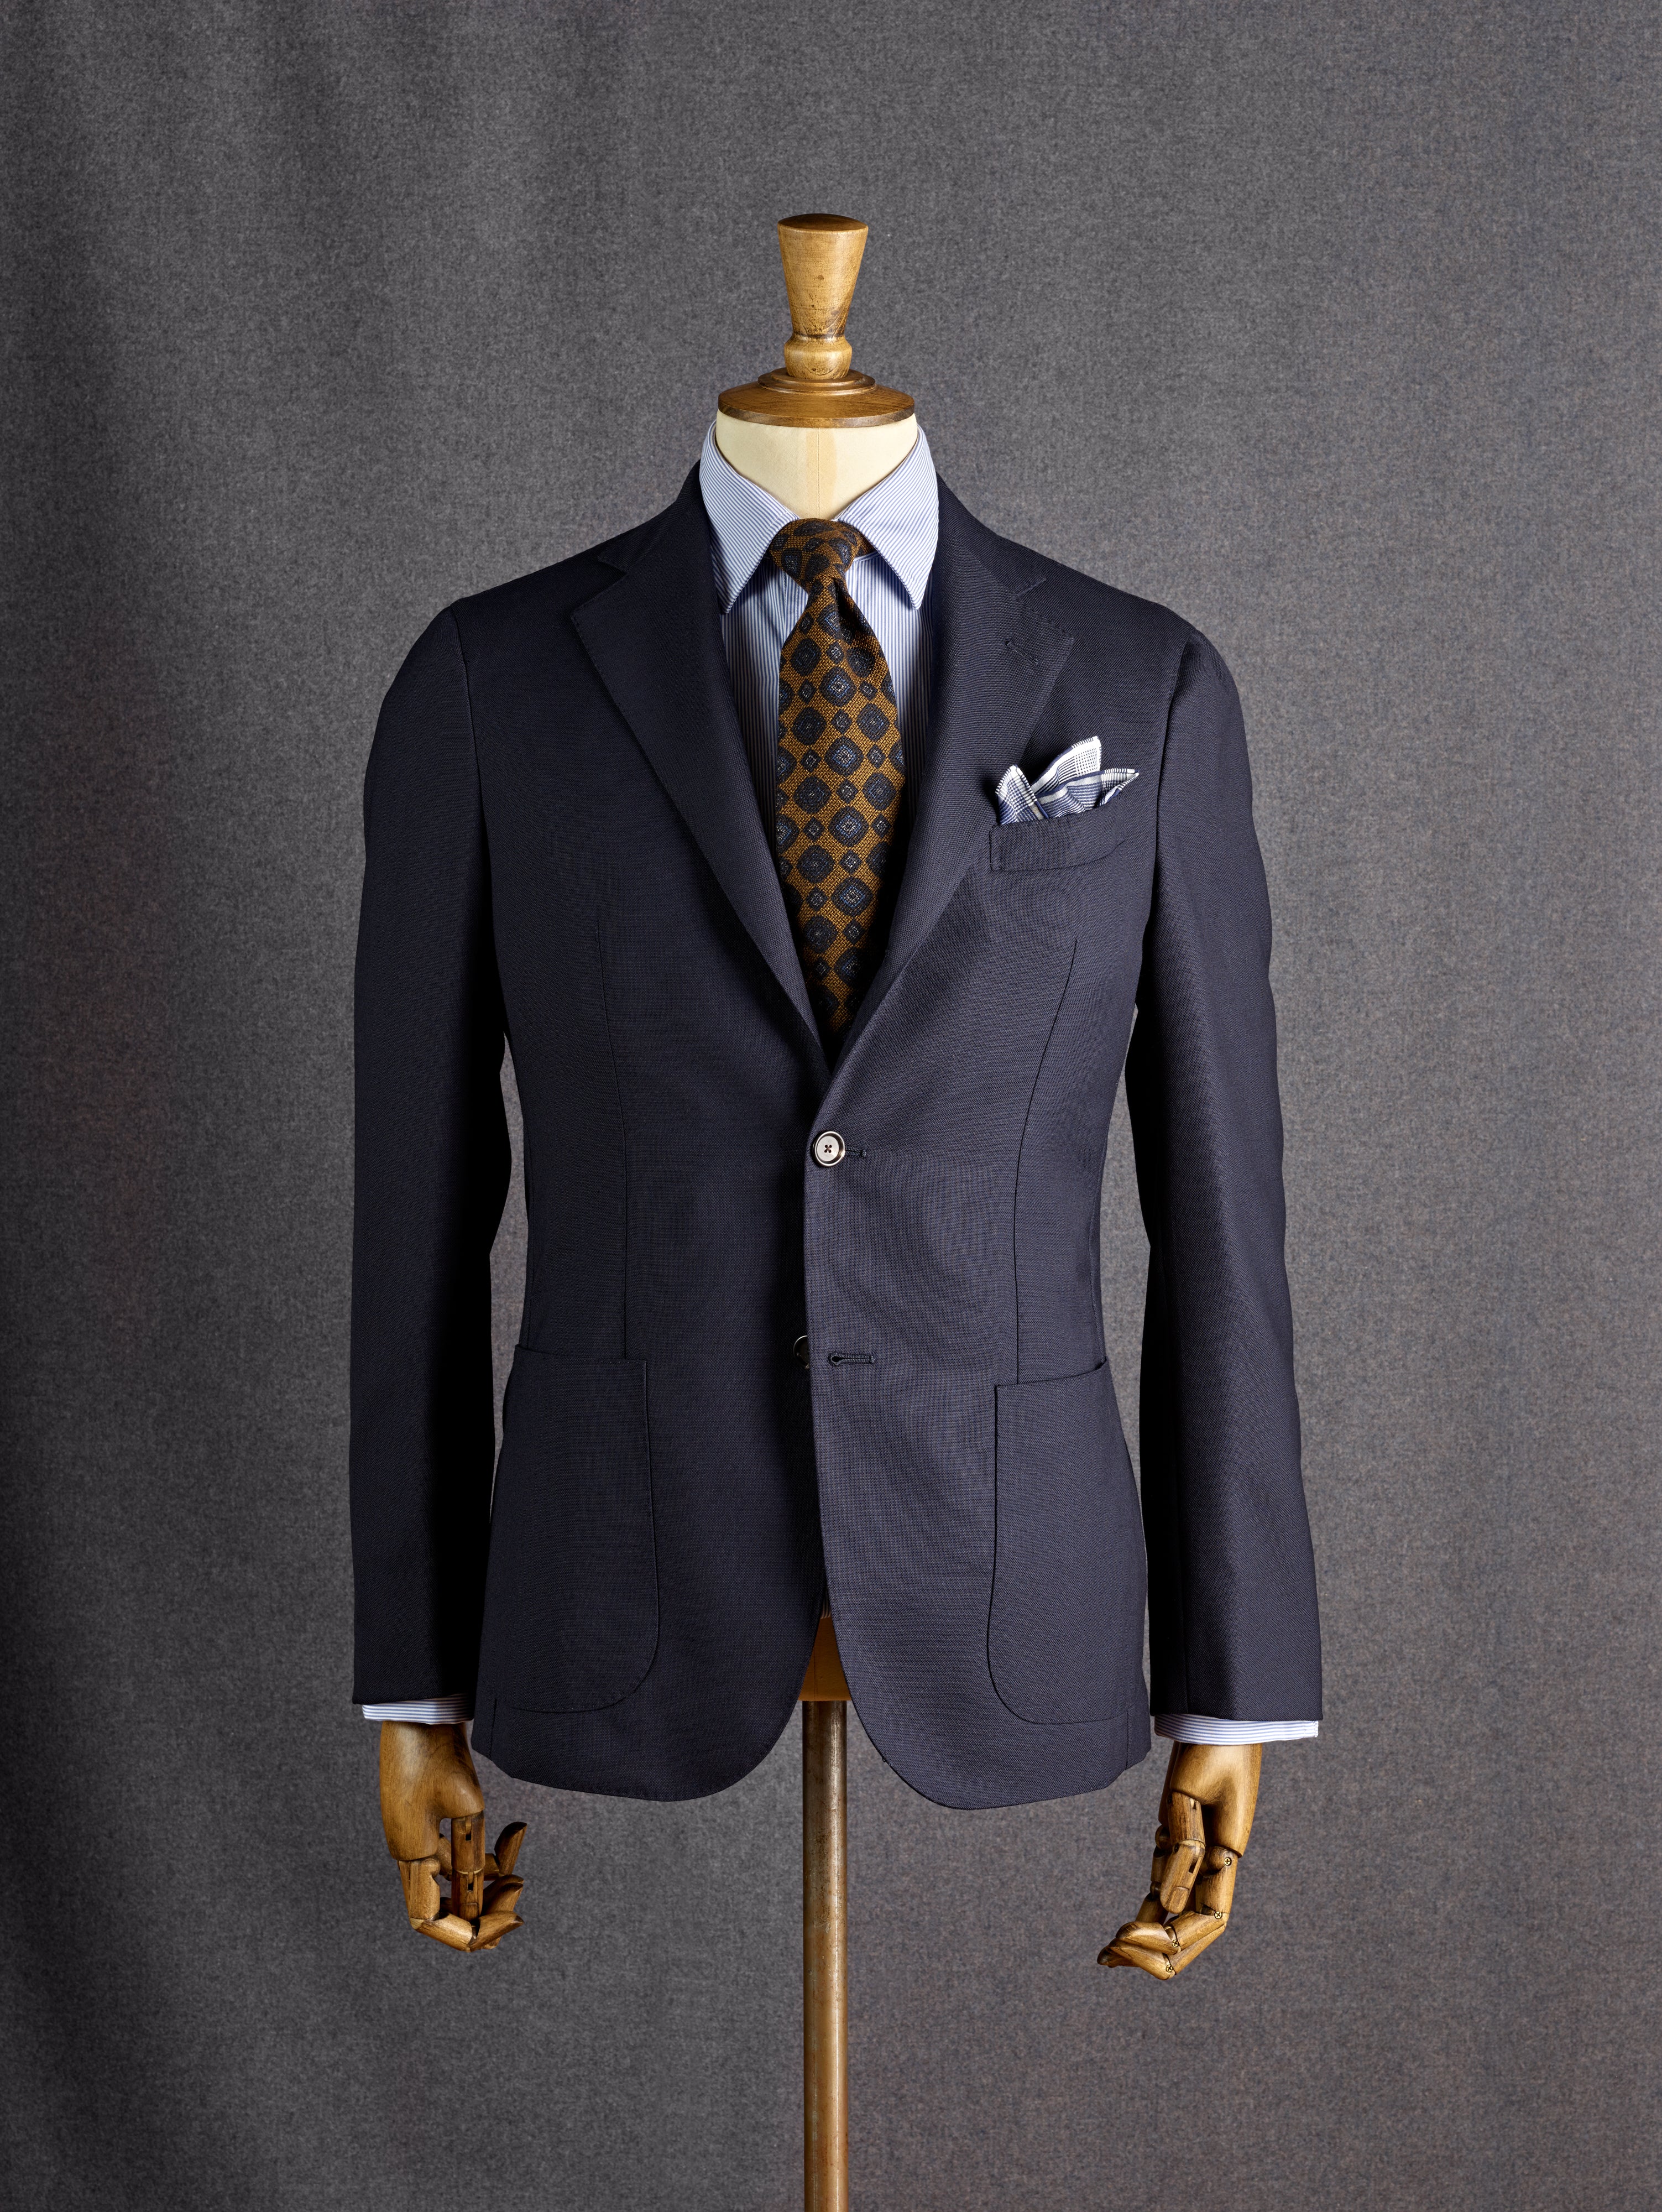 The Second Annual Fox Brothers Cloth Competition